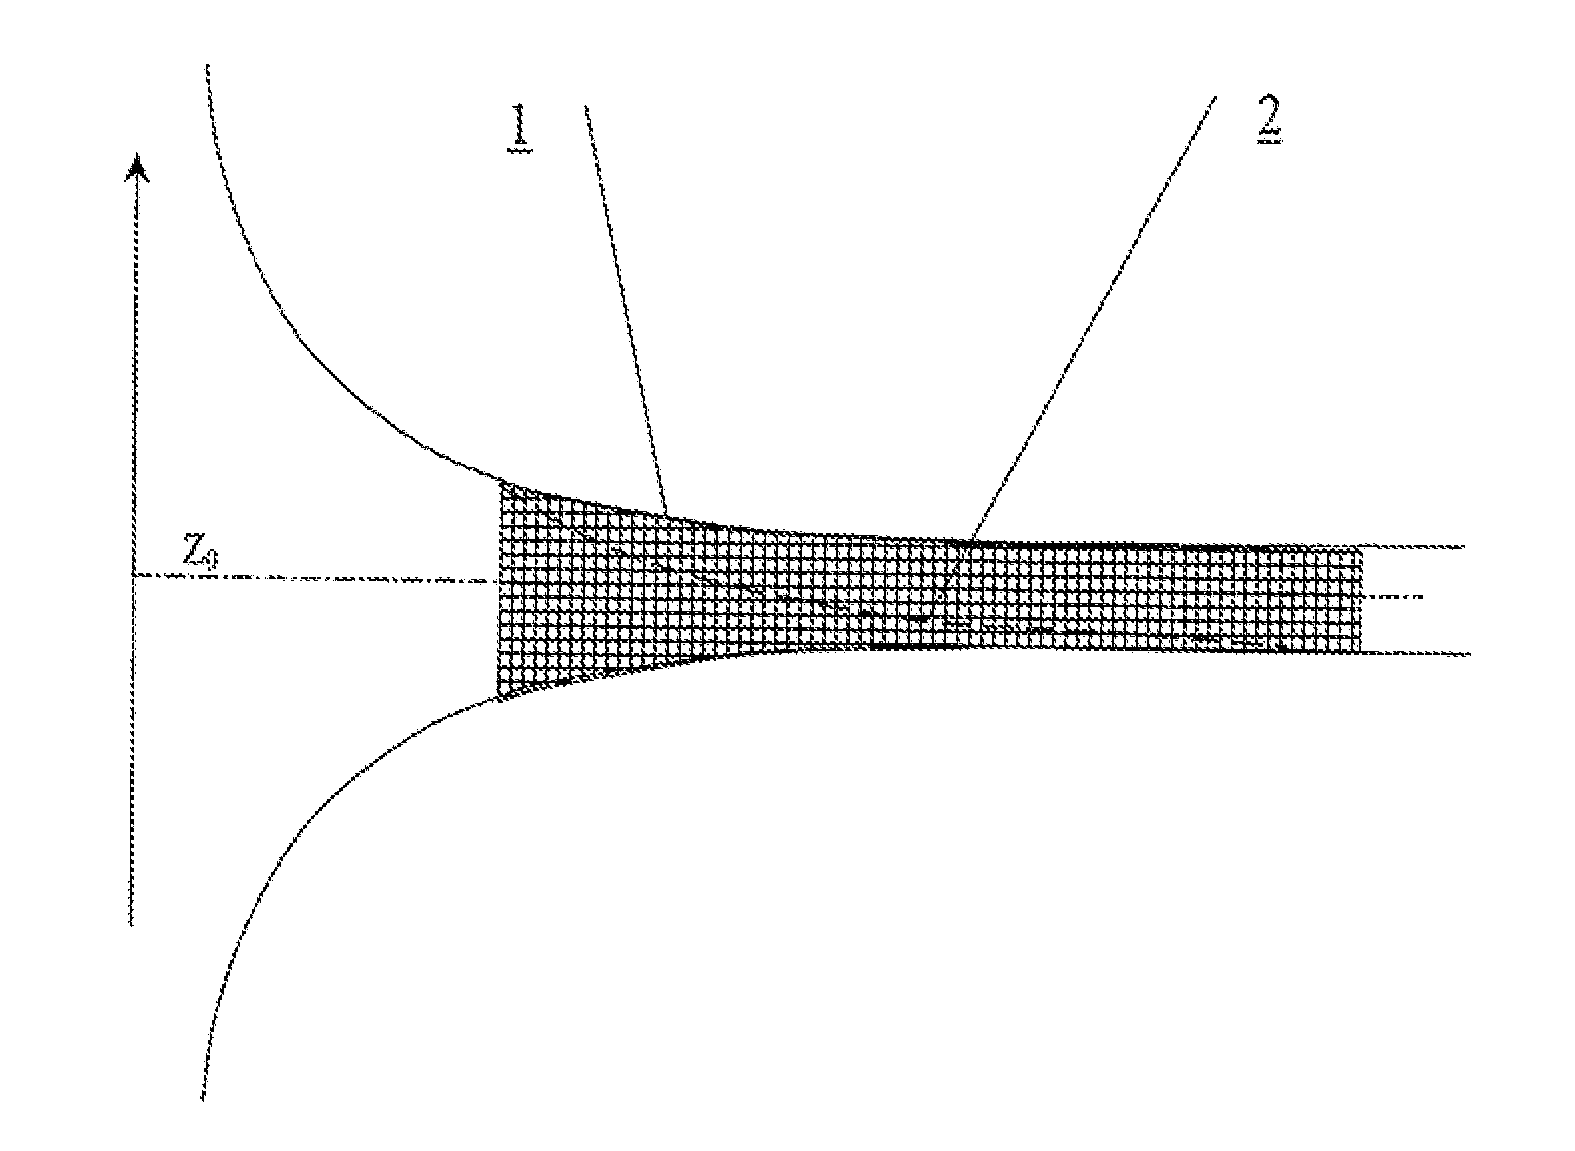 Method for forming a blood flow in surgically reconstituted segments of the blood circulatory system and devices for carrying out said method